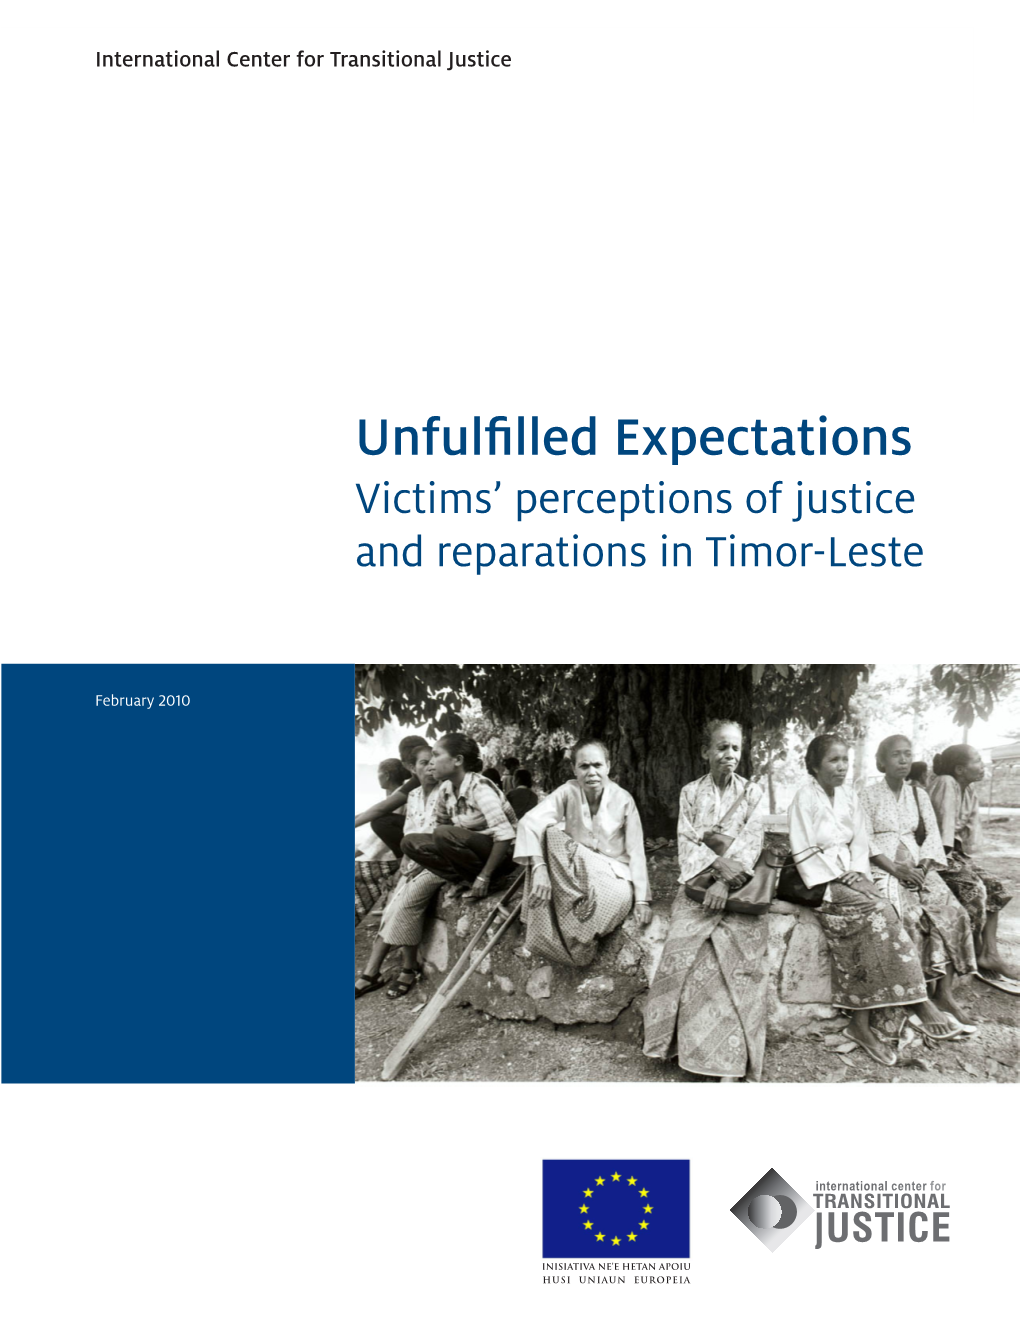 Unfulfilled Expectations Victims’ Perceptions of Justice and Reparations in Timor-Leste